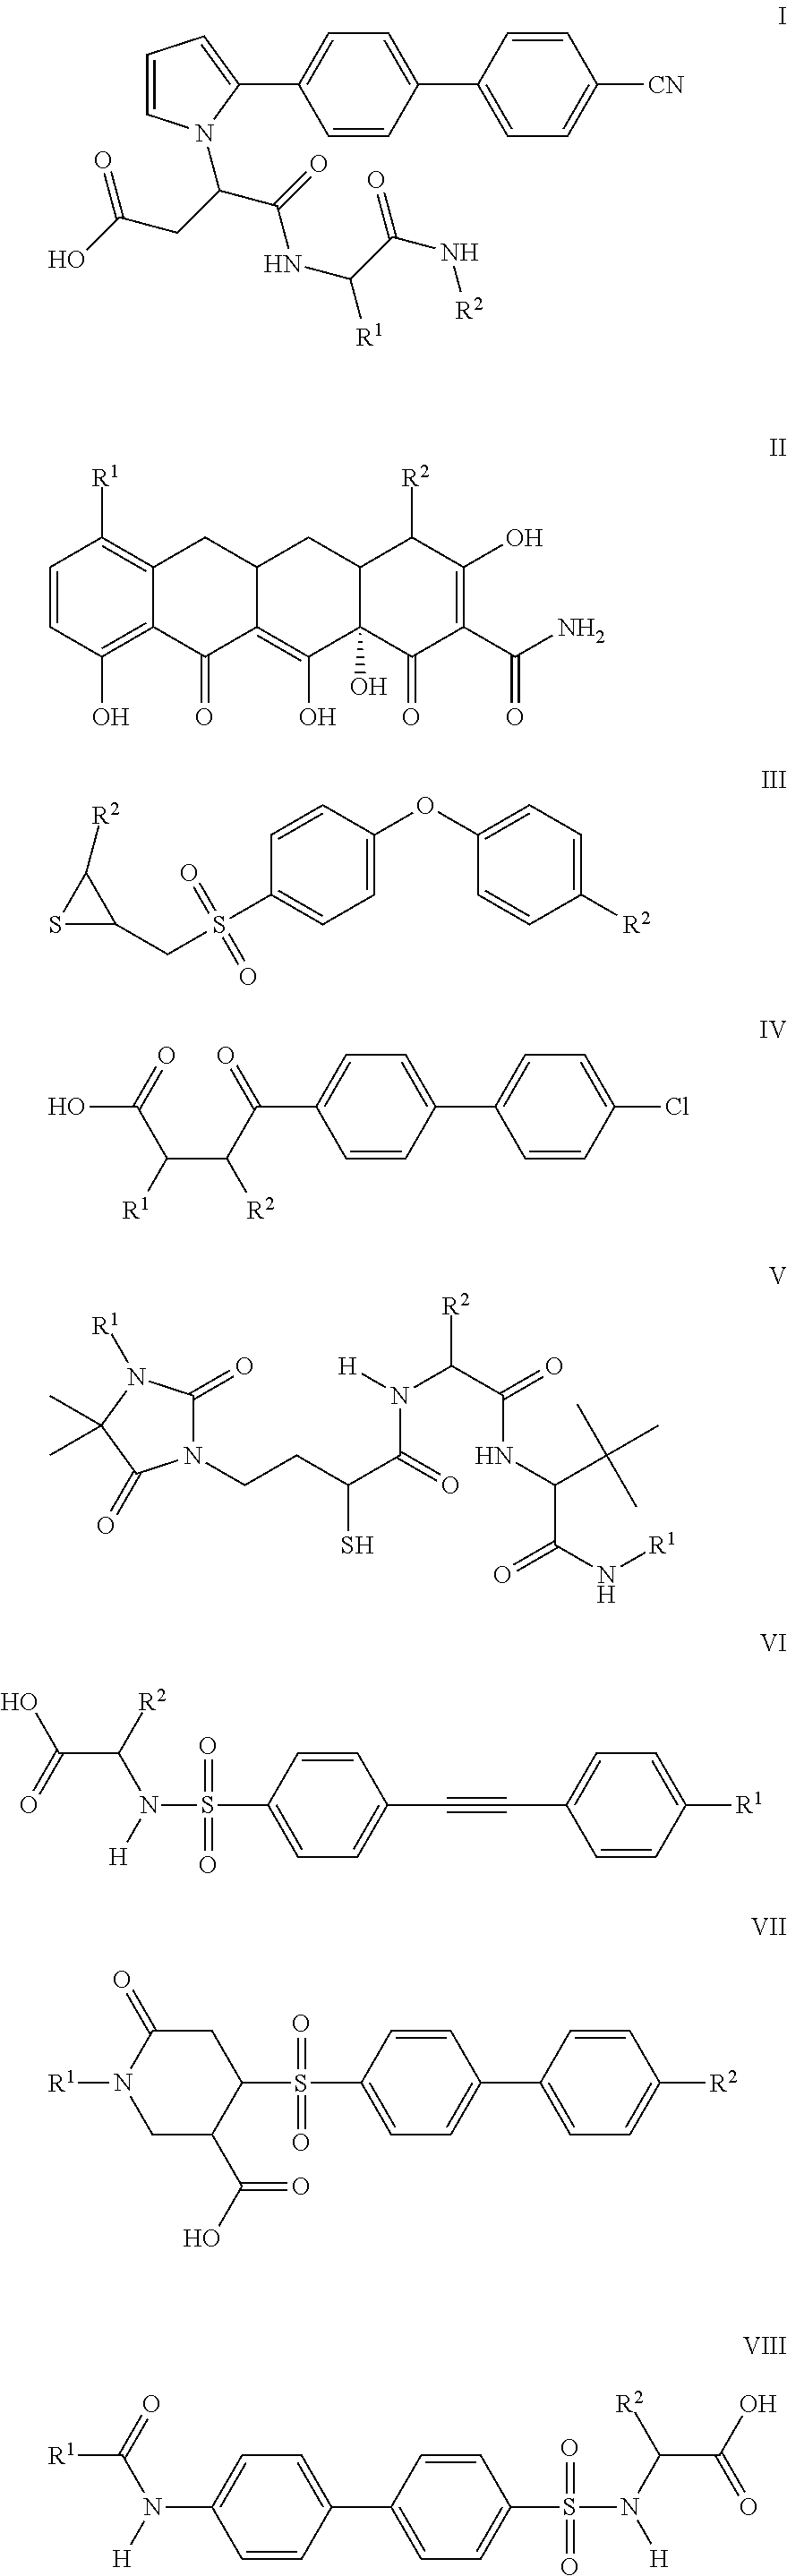 Compounds and methods for the treatment of pain and other diseases